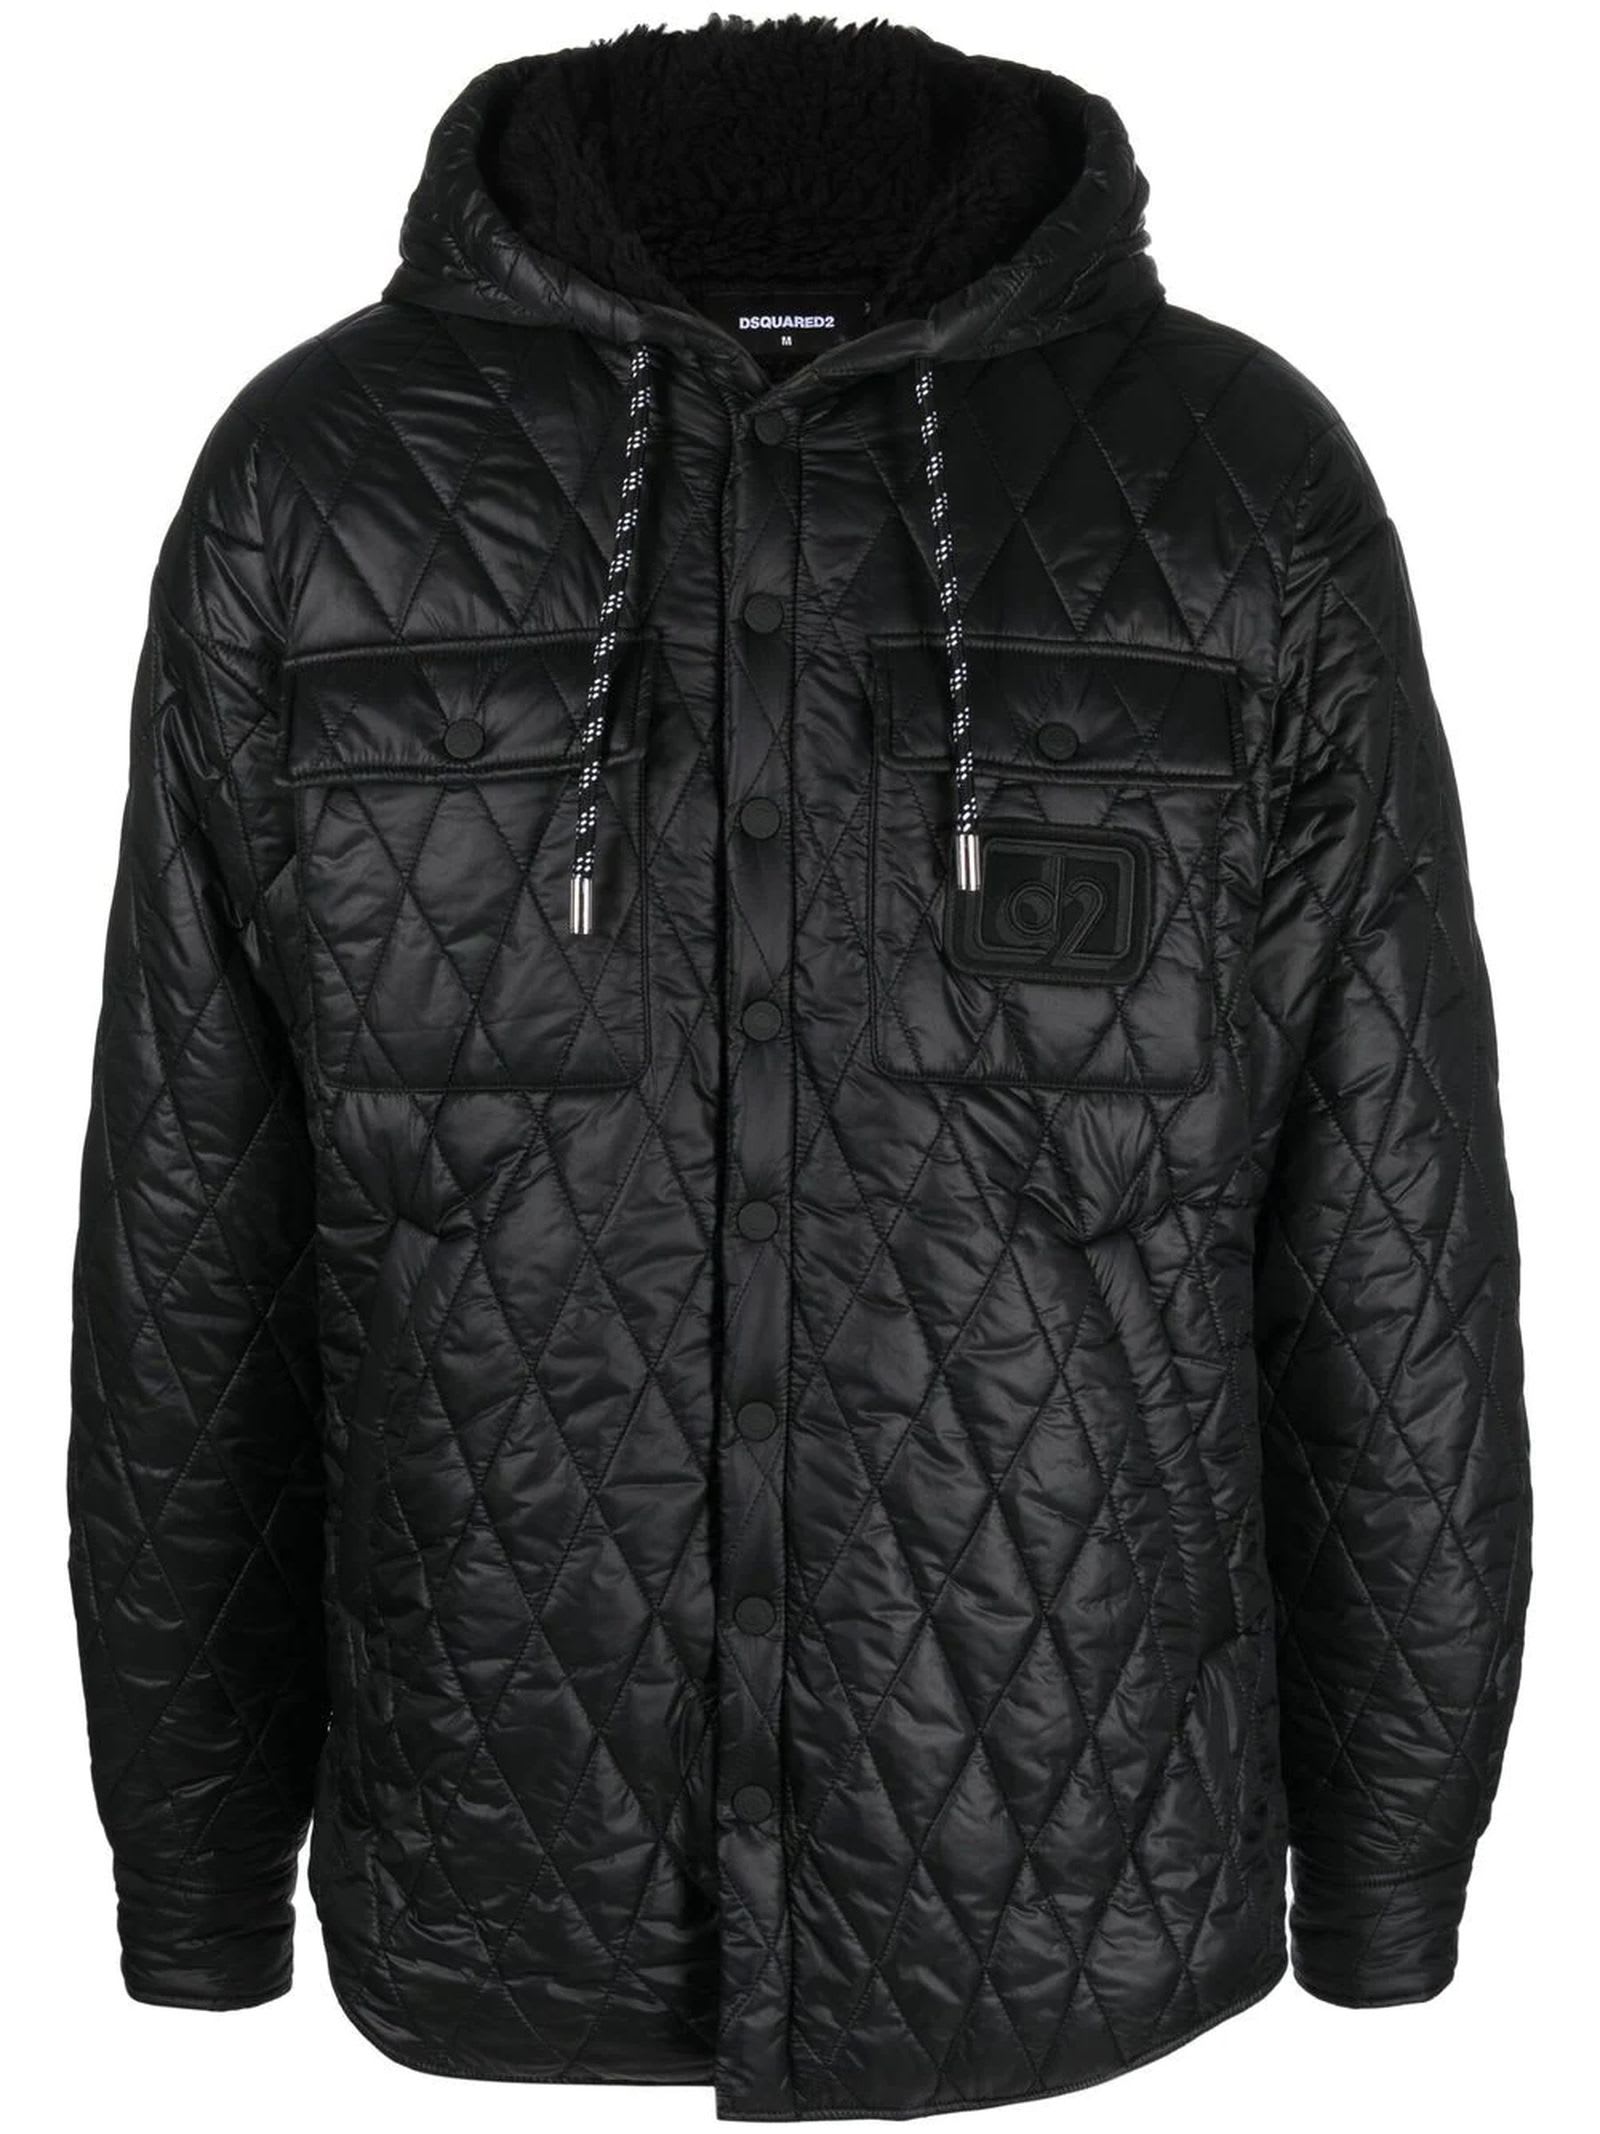 Dsquared2 Black Quilted Jacket